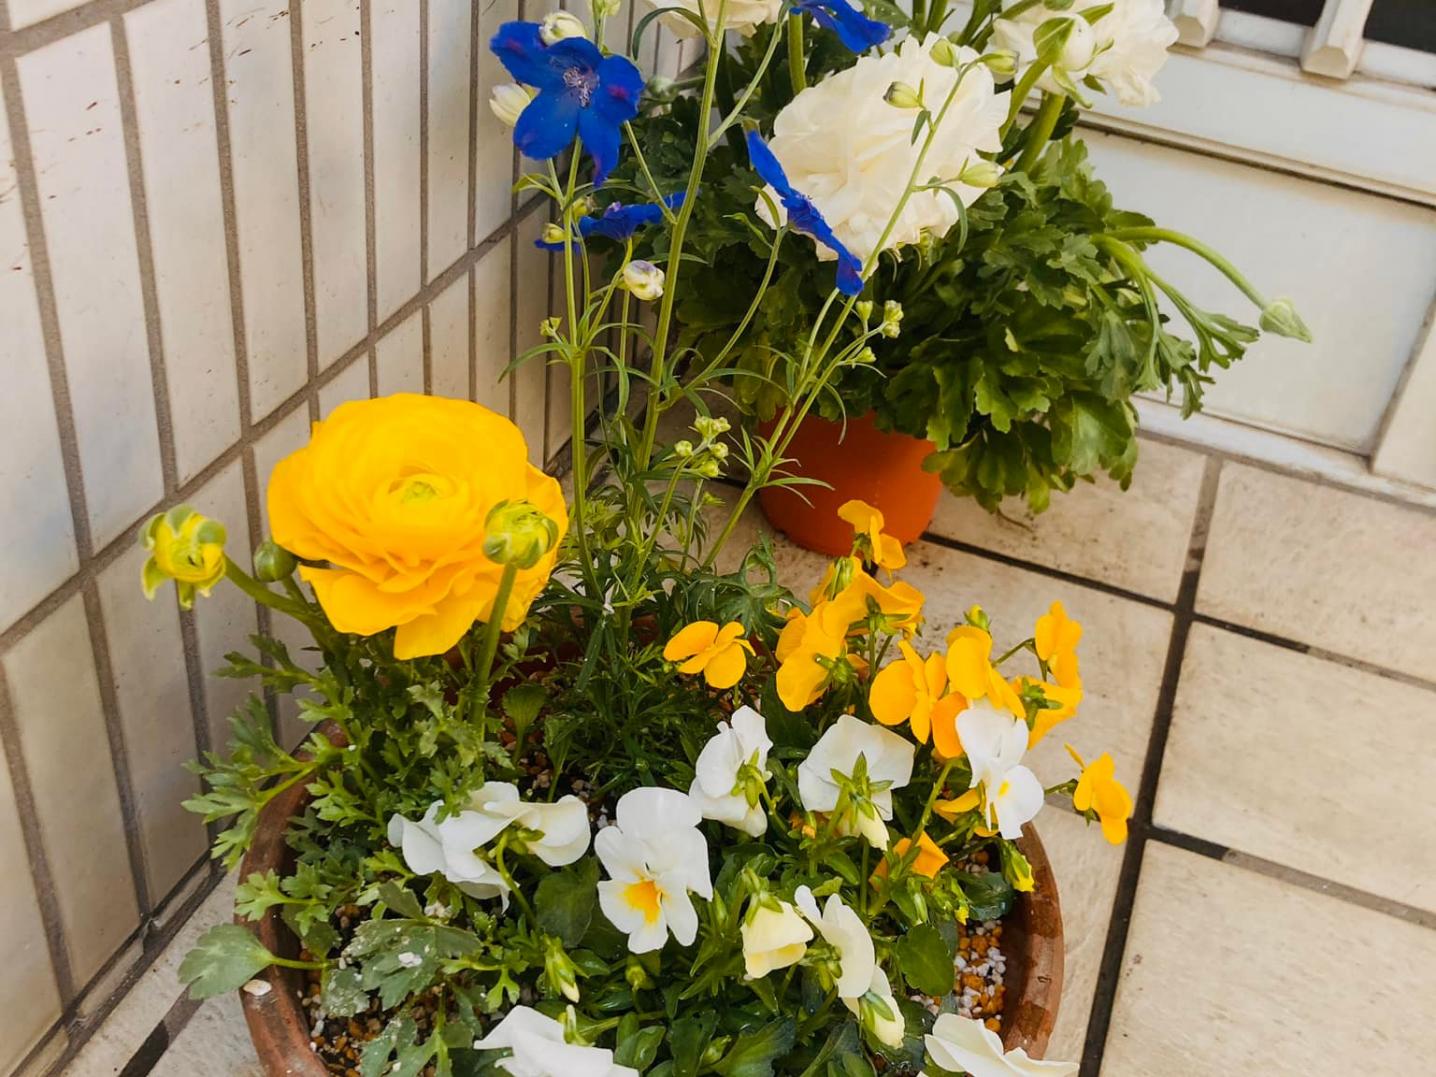 Flowers in yellow and blue brought by neighbours, co.iki residency in Tokyo, Japan